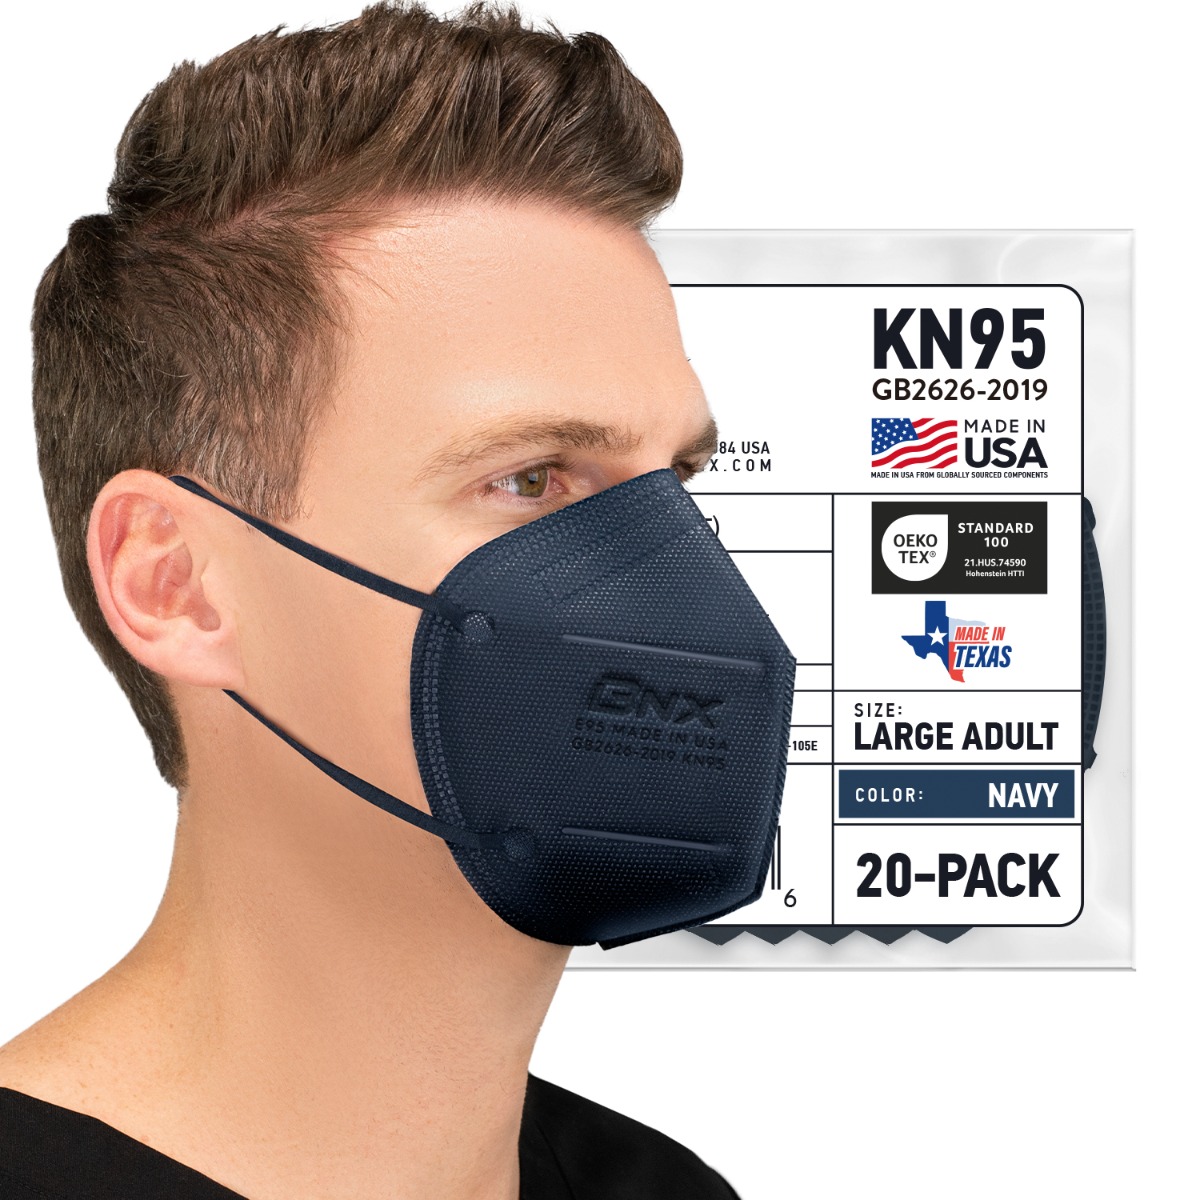 BNX 20-Pack KN95 E95 Protective Face Mask, Disposable Particulate Mask Made in USA, Protection Against Dust, Pollen and Haze, Navy (20 Pack) (Earloop) (Model: E95) Adult Large